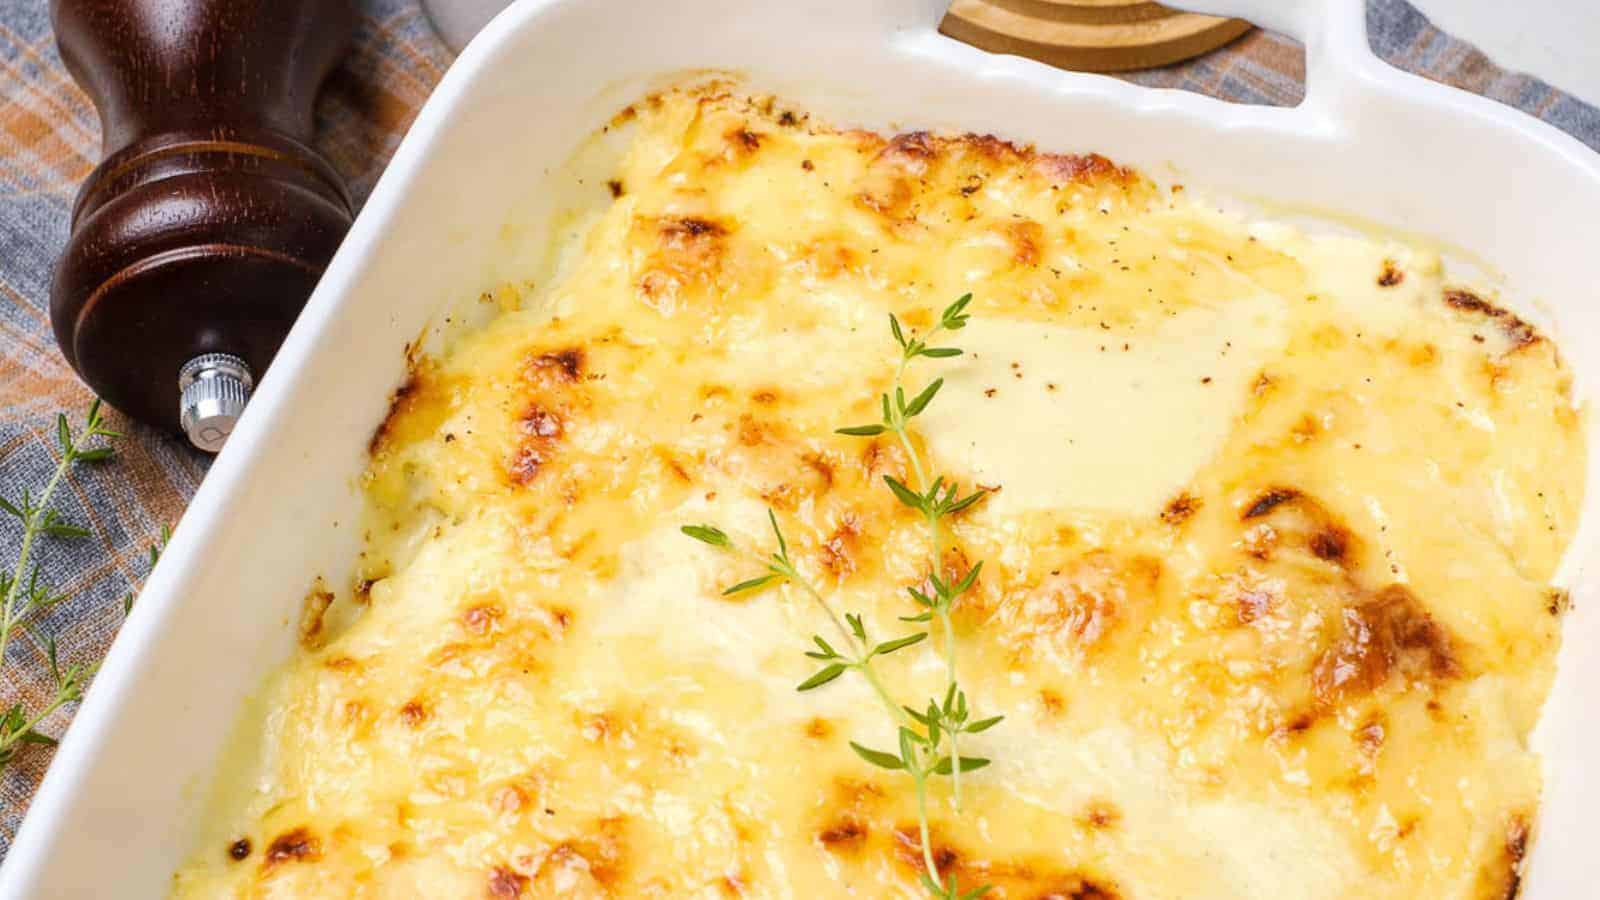 An oven dish with baked dauphinoise potatoes in it.